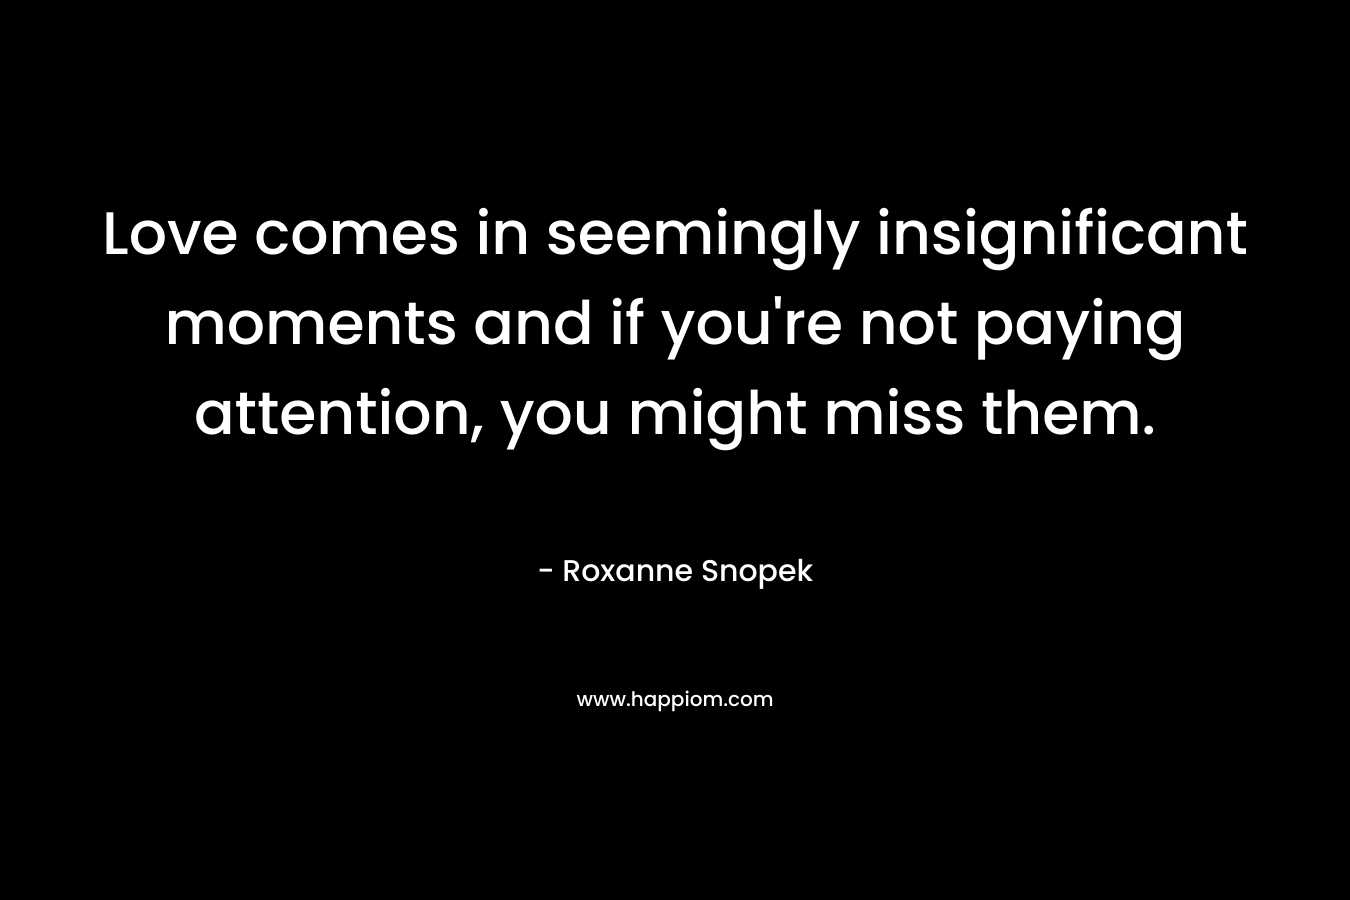 Love comes in seemingly insignificant moments and if you’re not paying attention, you might miss them. – Roxanne Snopek